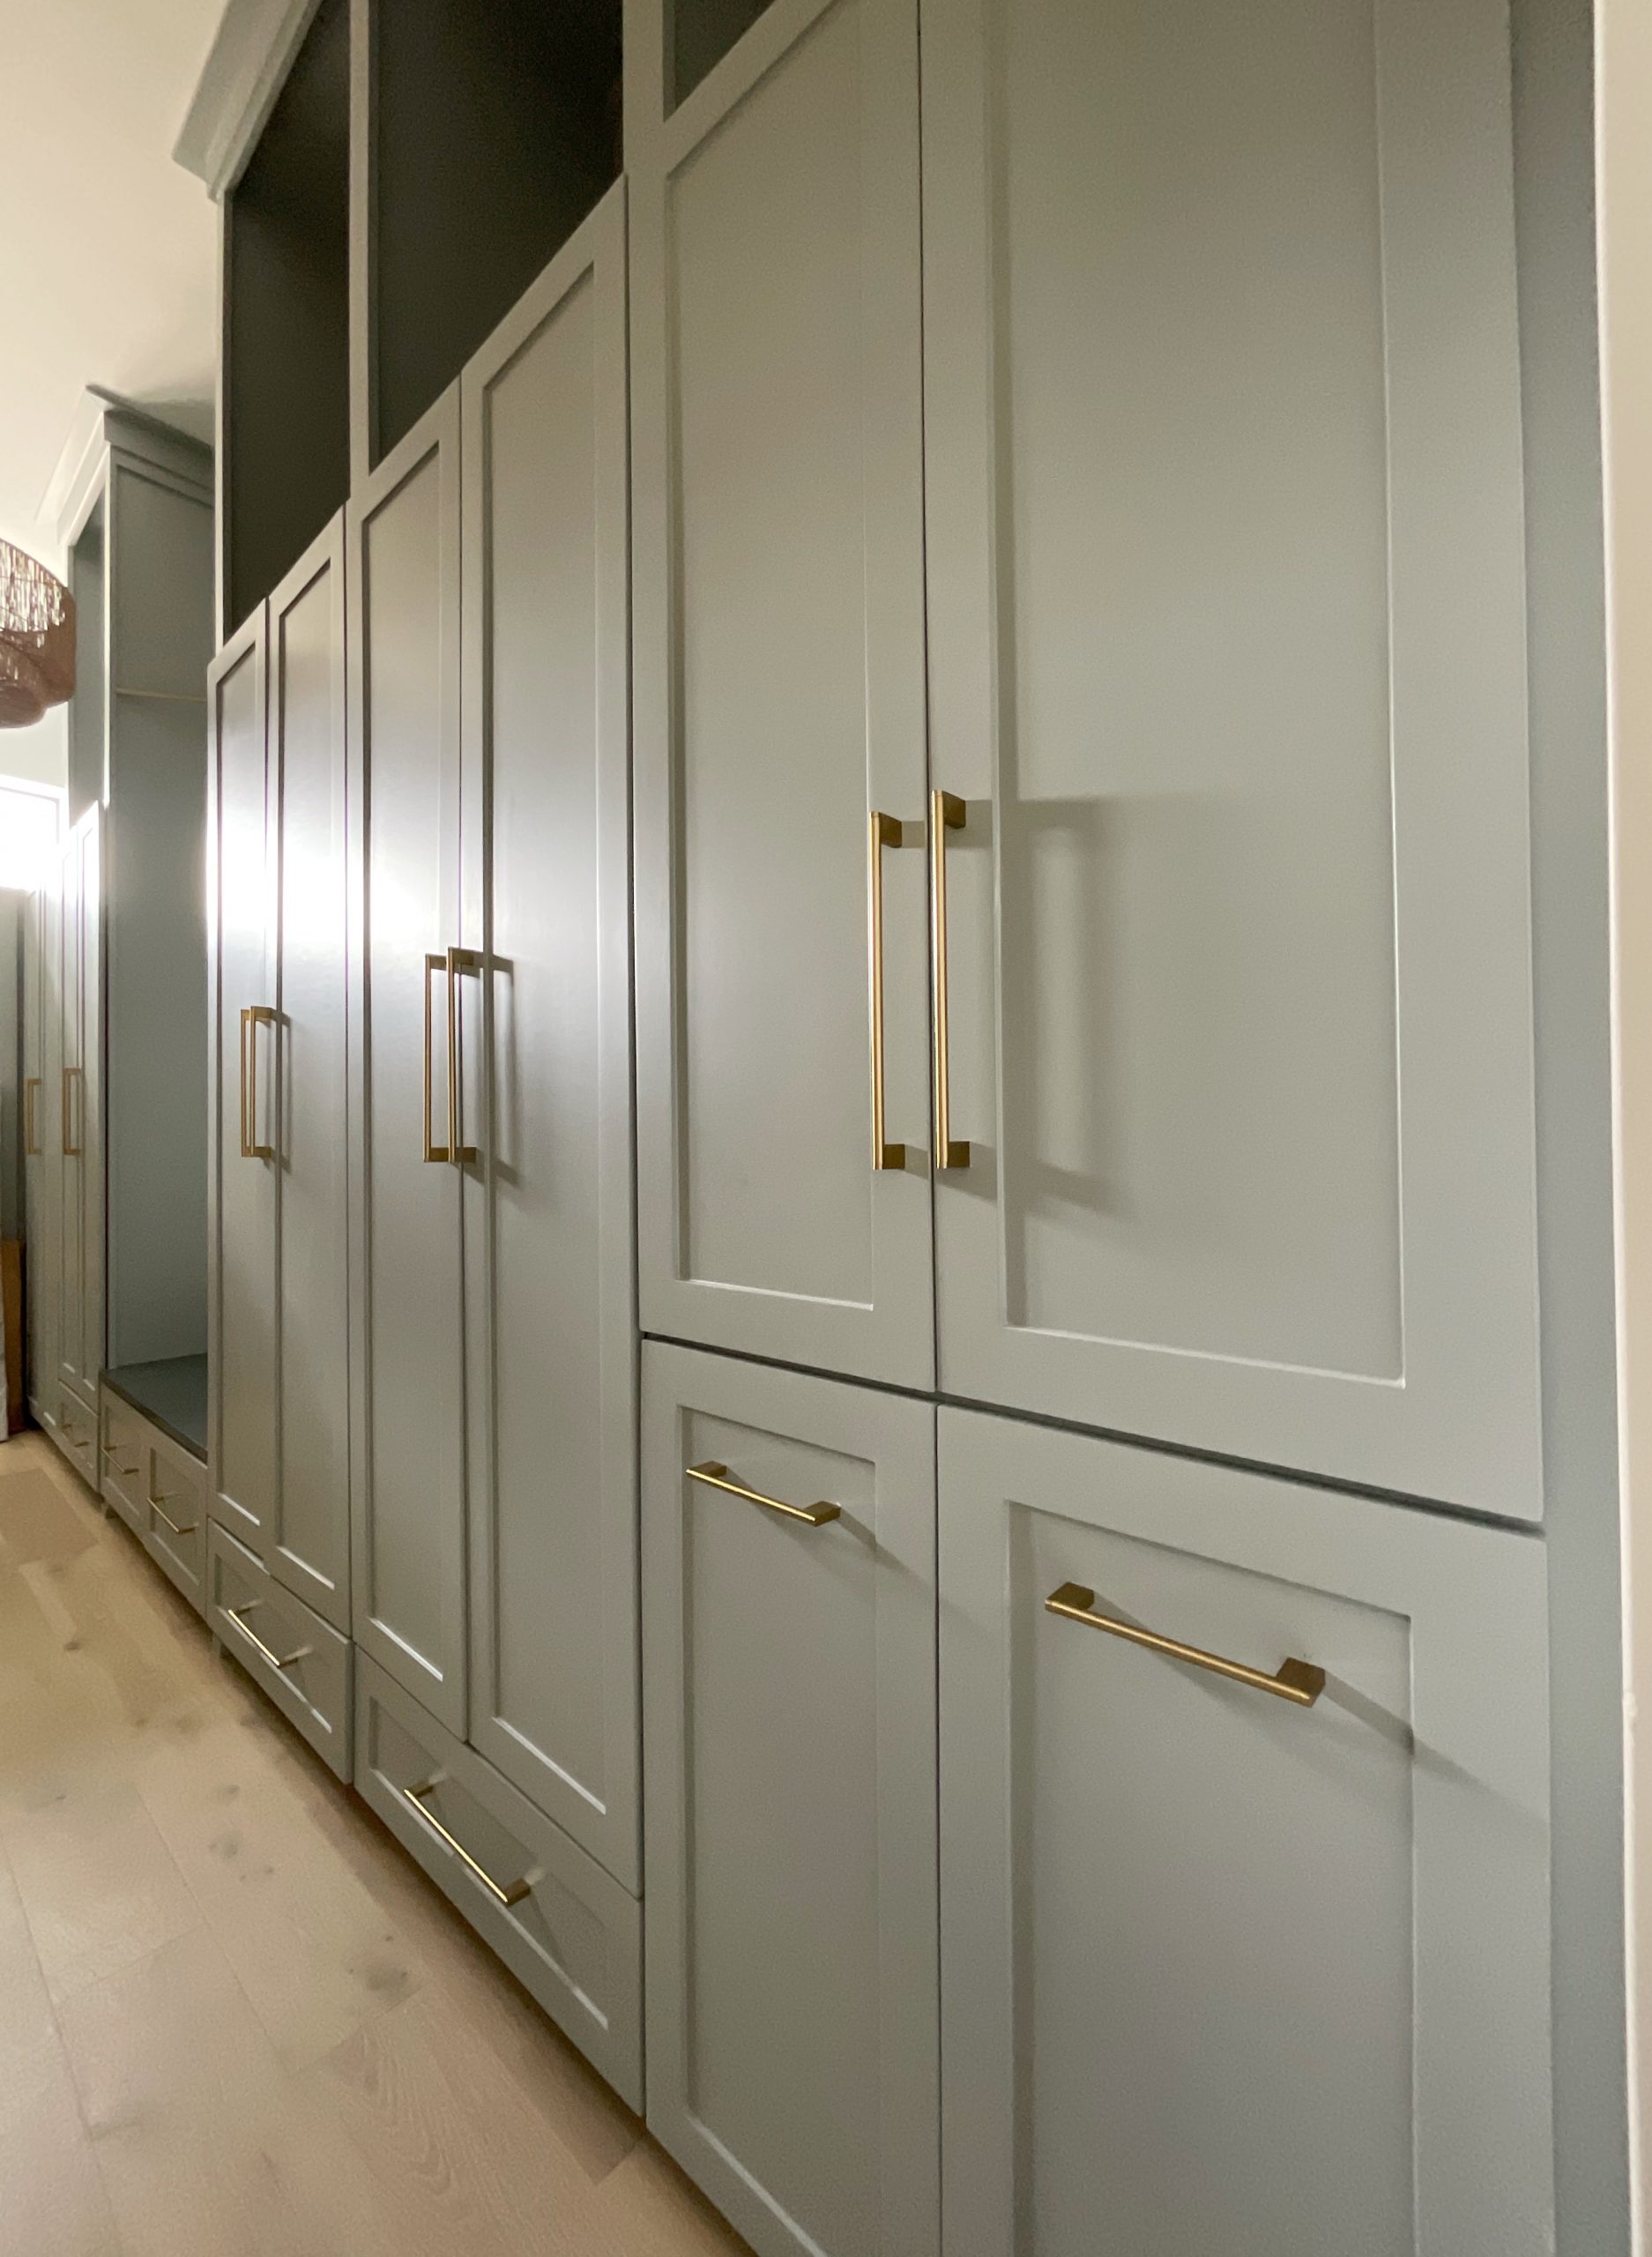 Primary Bedroom Closet with Custom Cabinets in Sherwin Williams Retreat